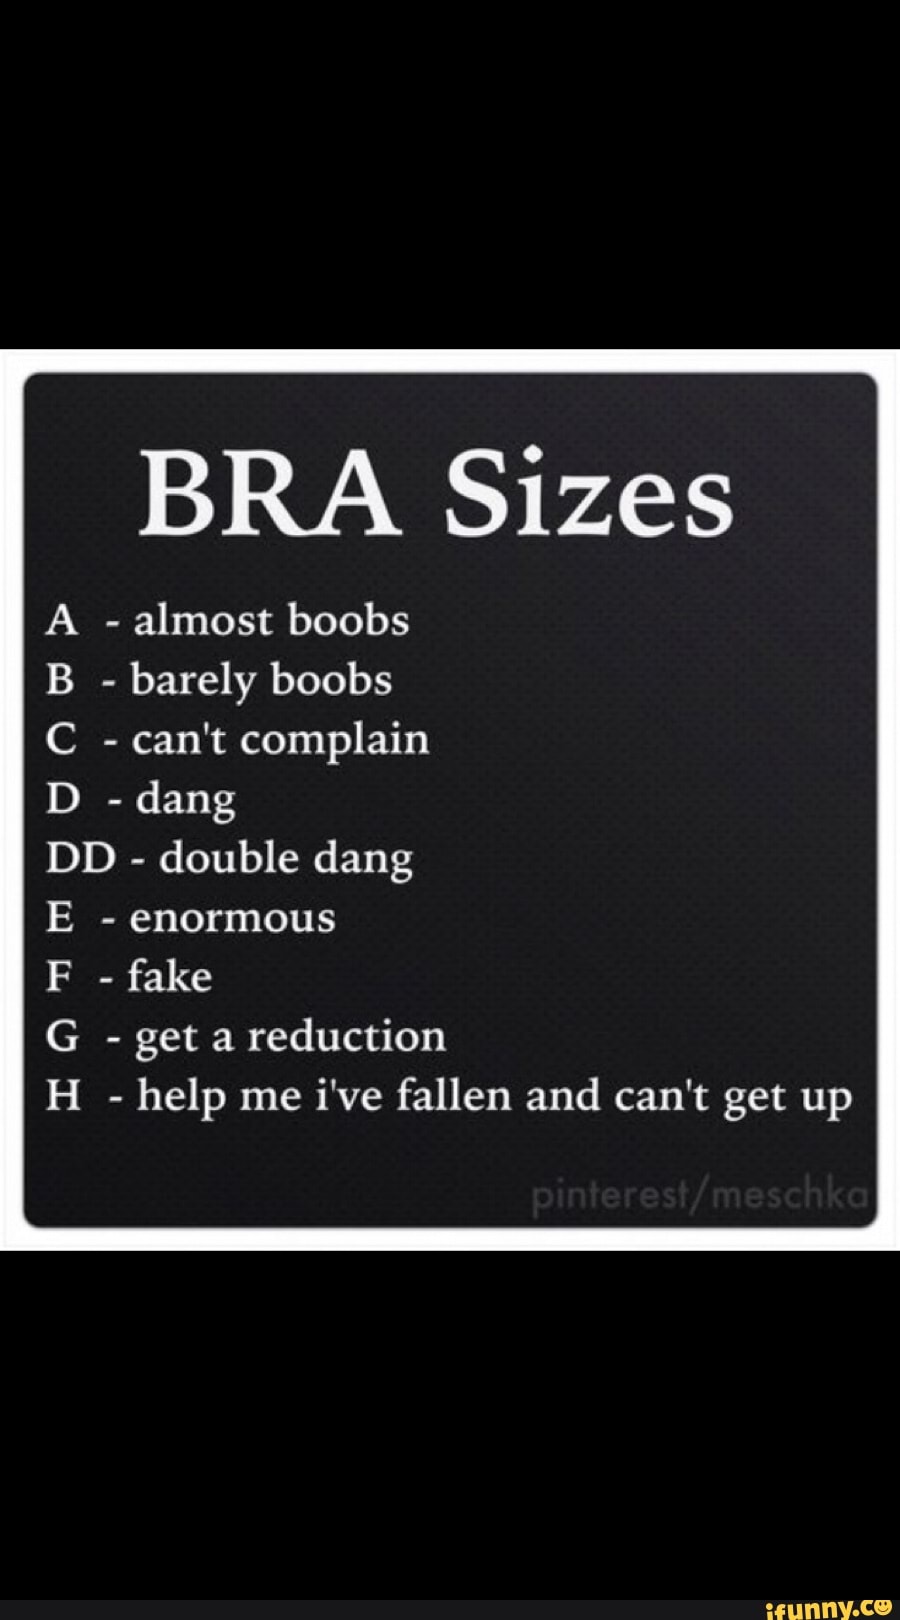 BRA Sizes A almost boobs B barely boobs C can't complain D dang DD double